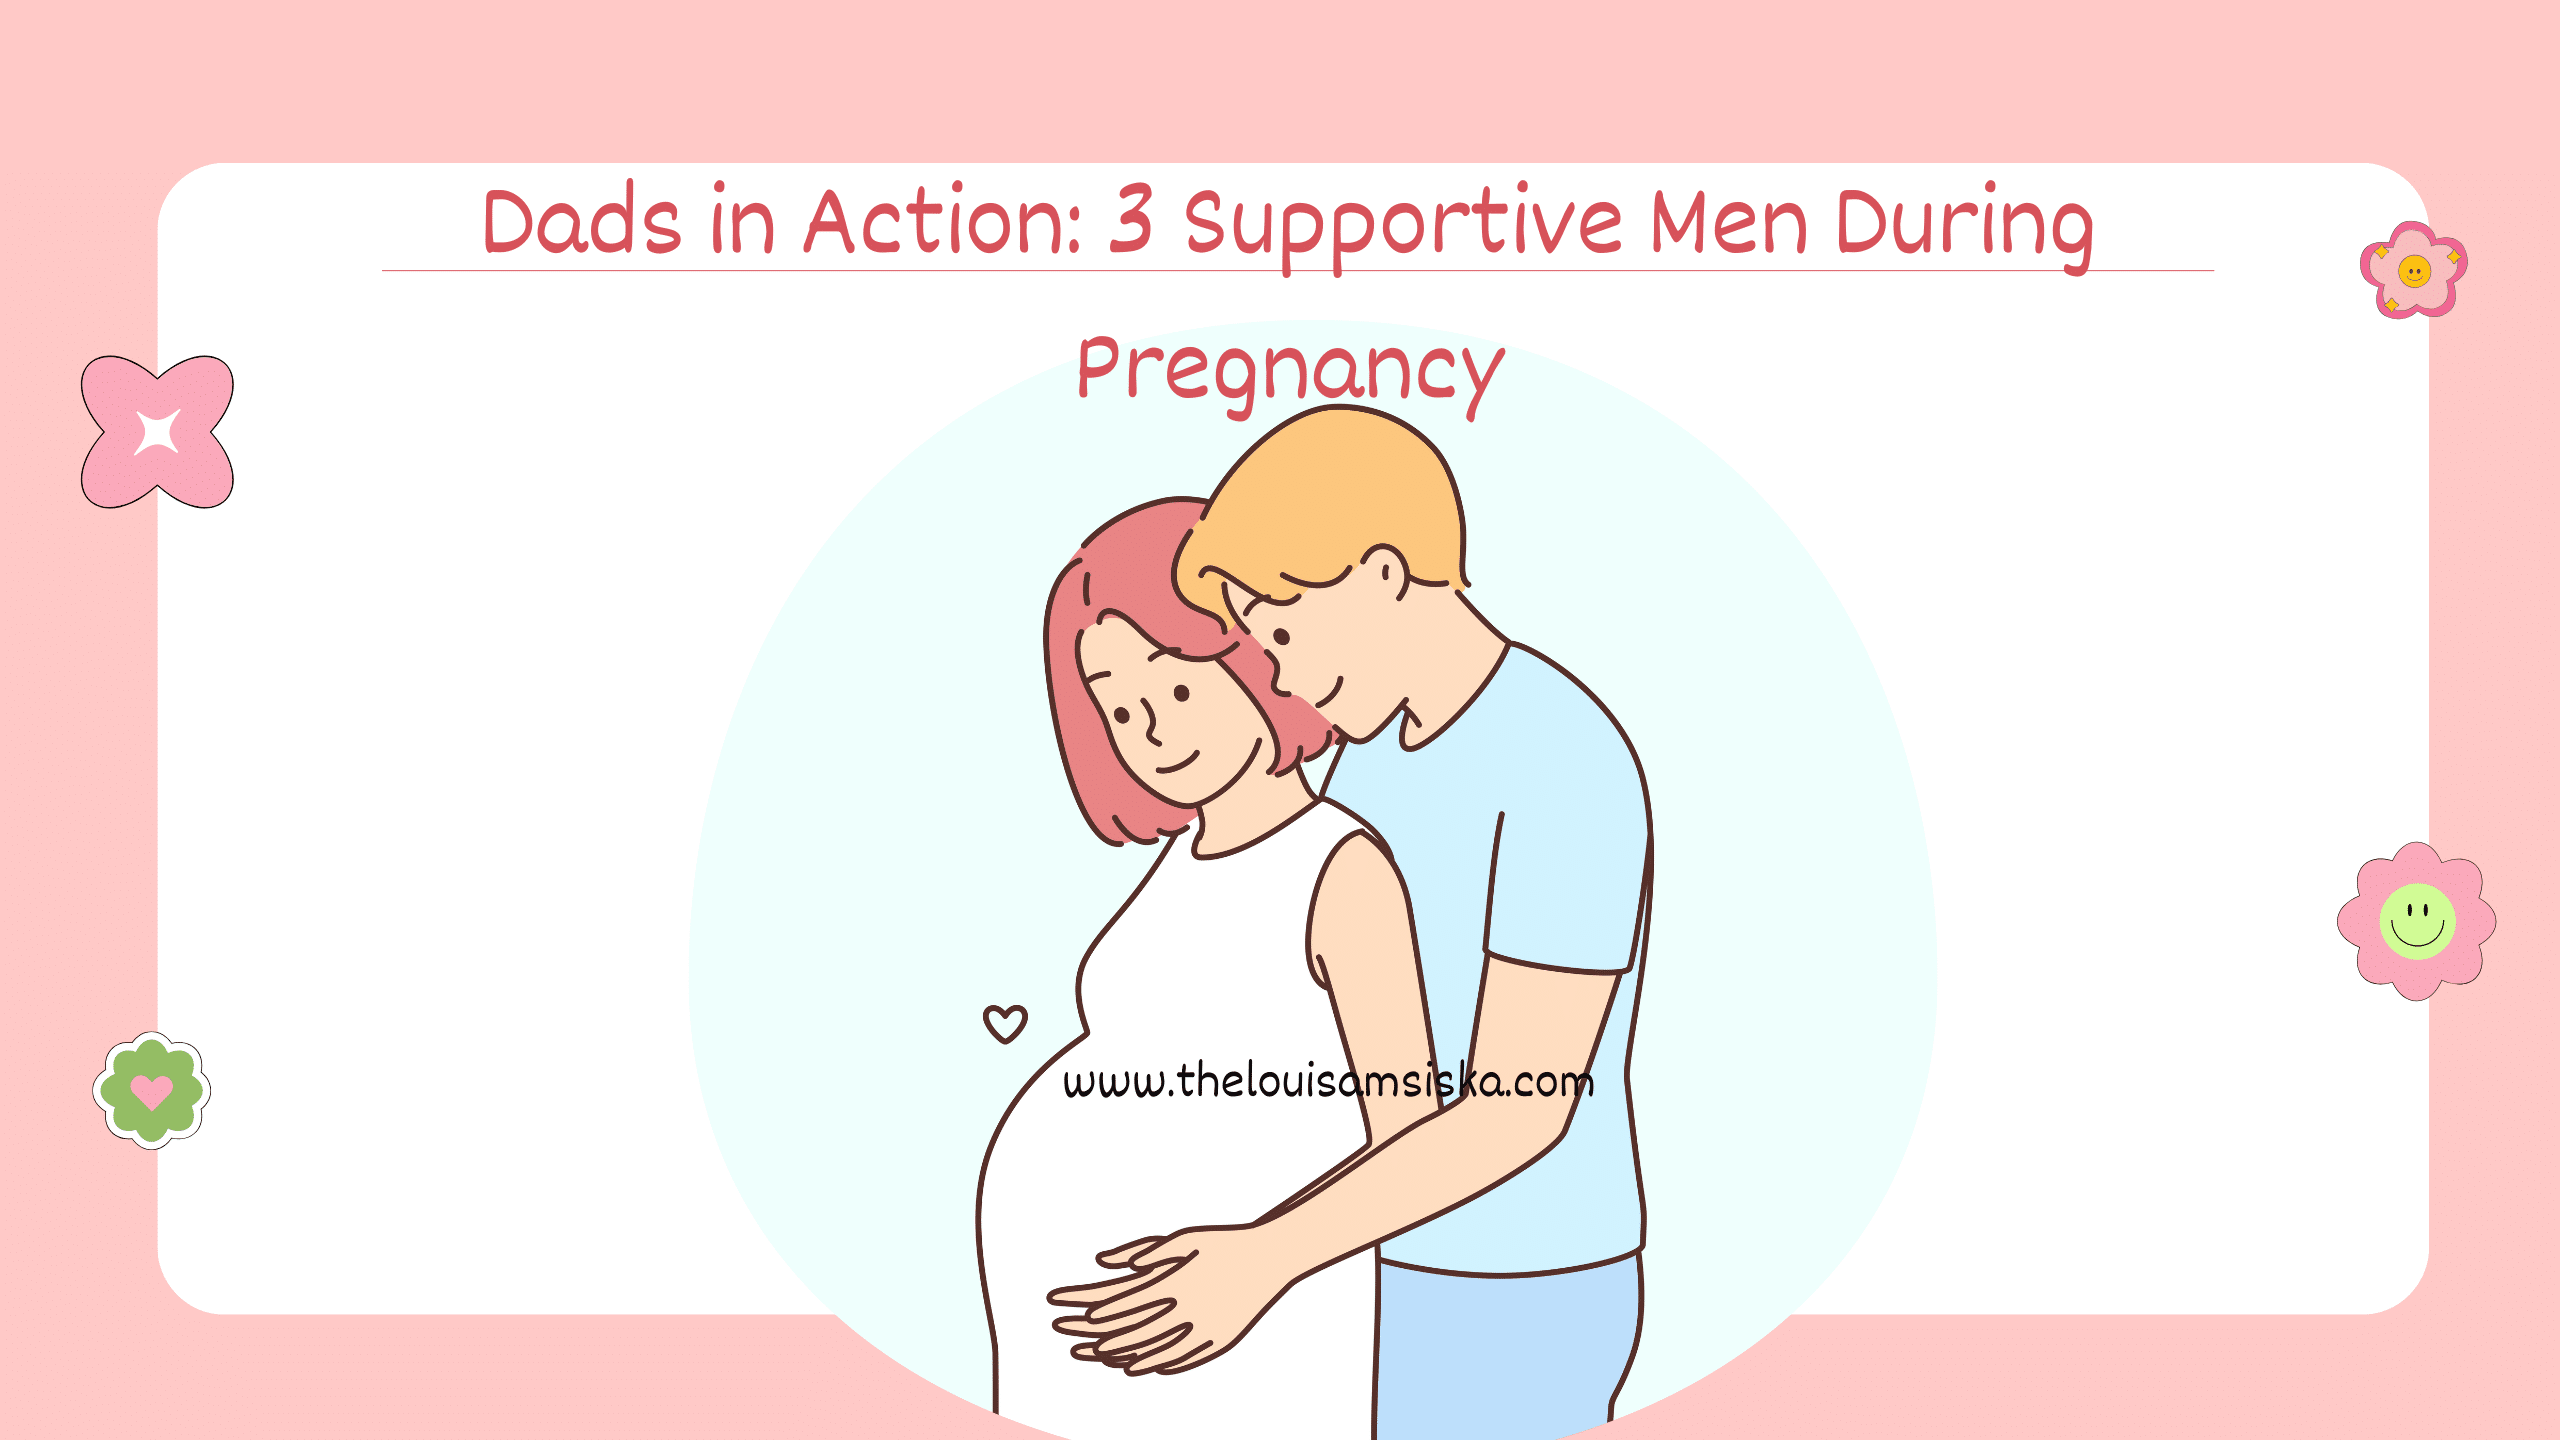 Dads in Action: 4 Supportive Men During Pregnancy